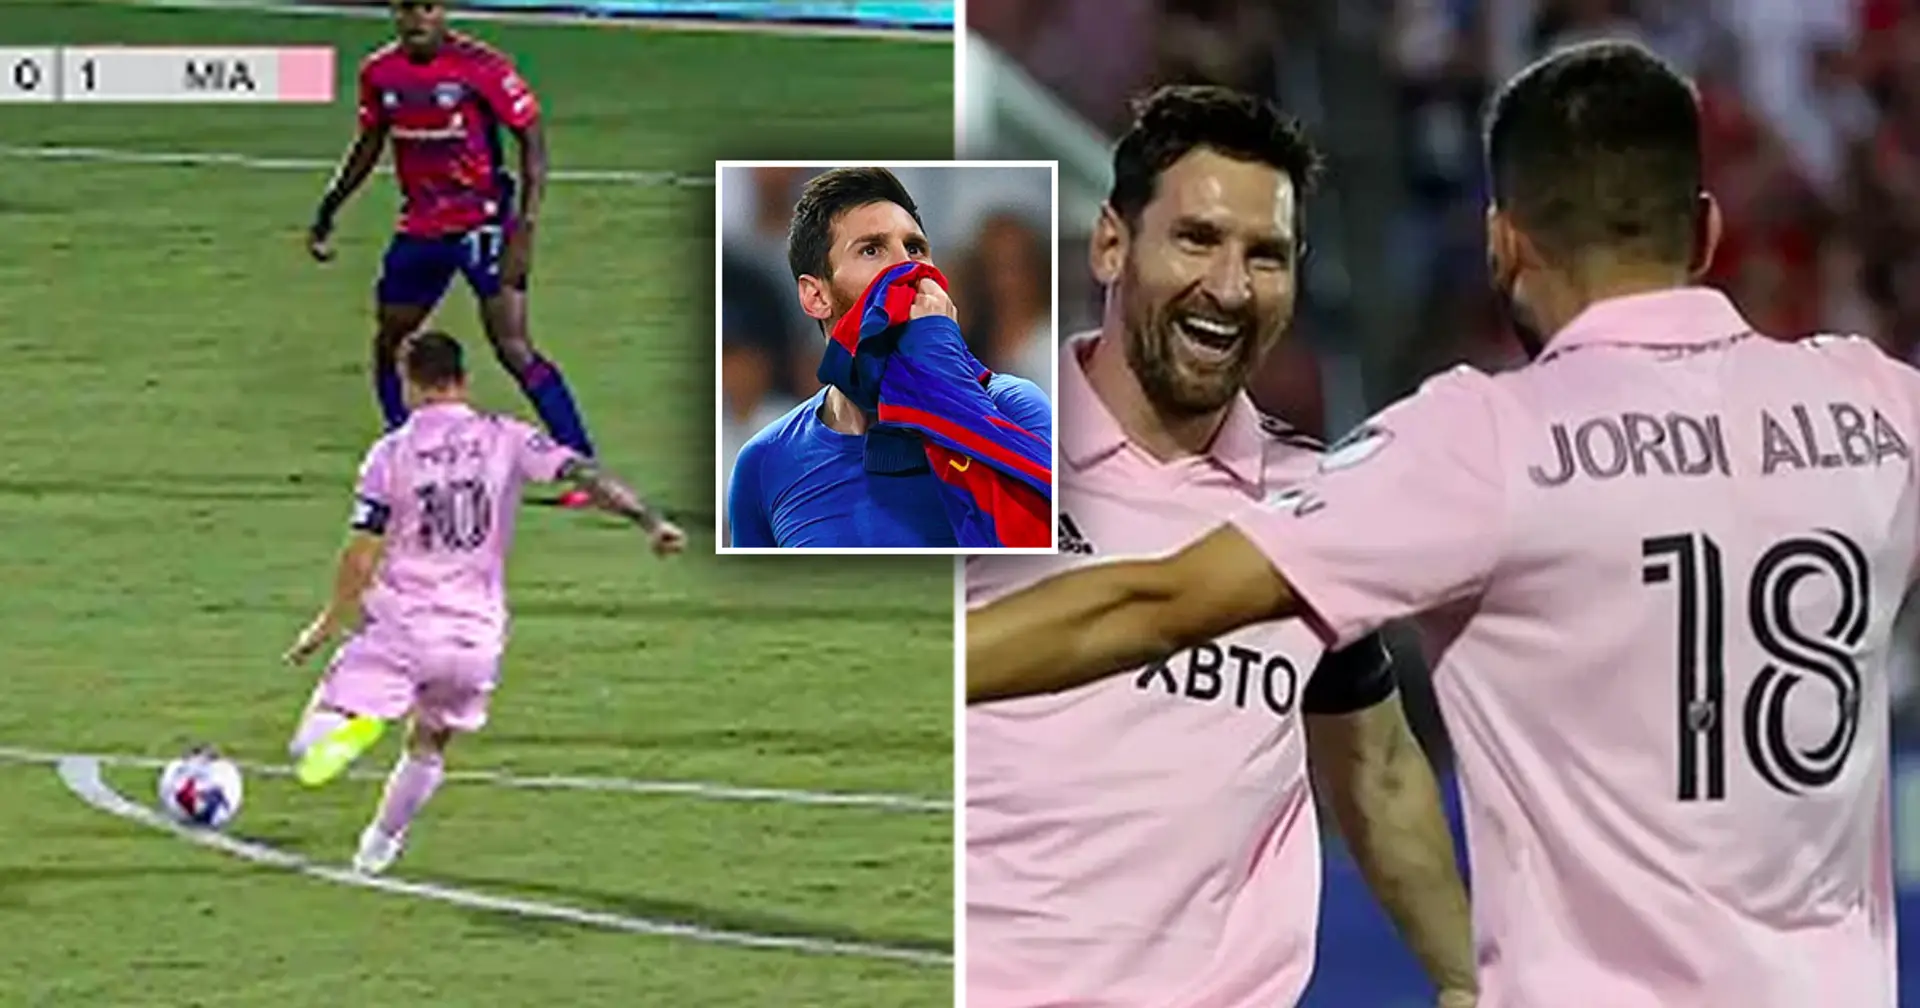 'We've seen this before': Messi links up with Jordi Alba to reproduce famous El Clasico goal at Inter Miami